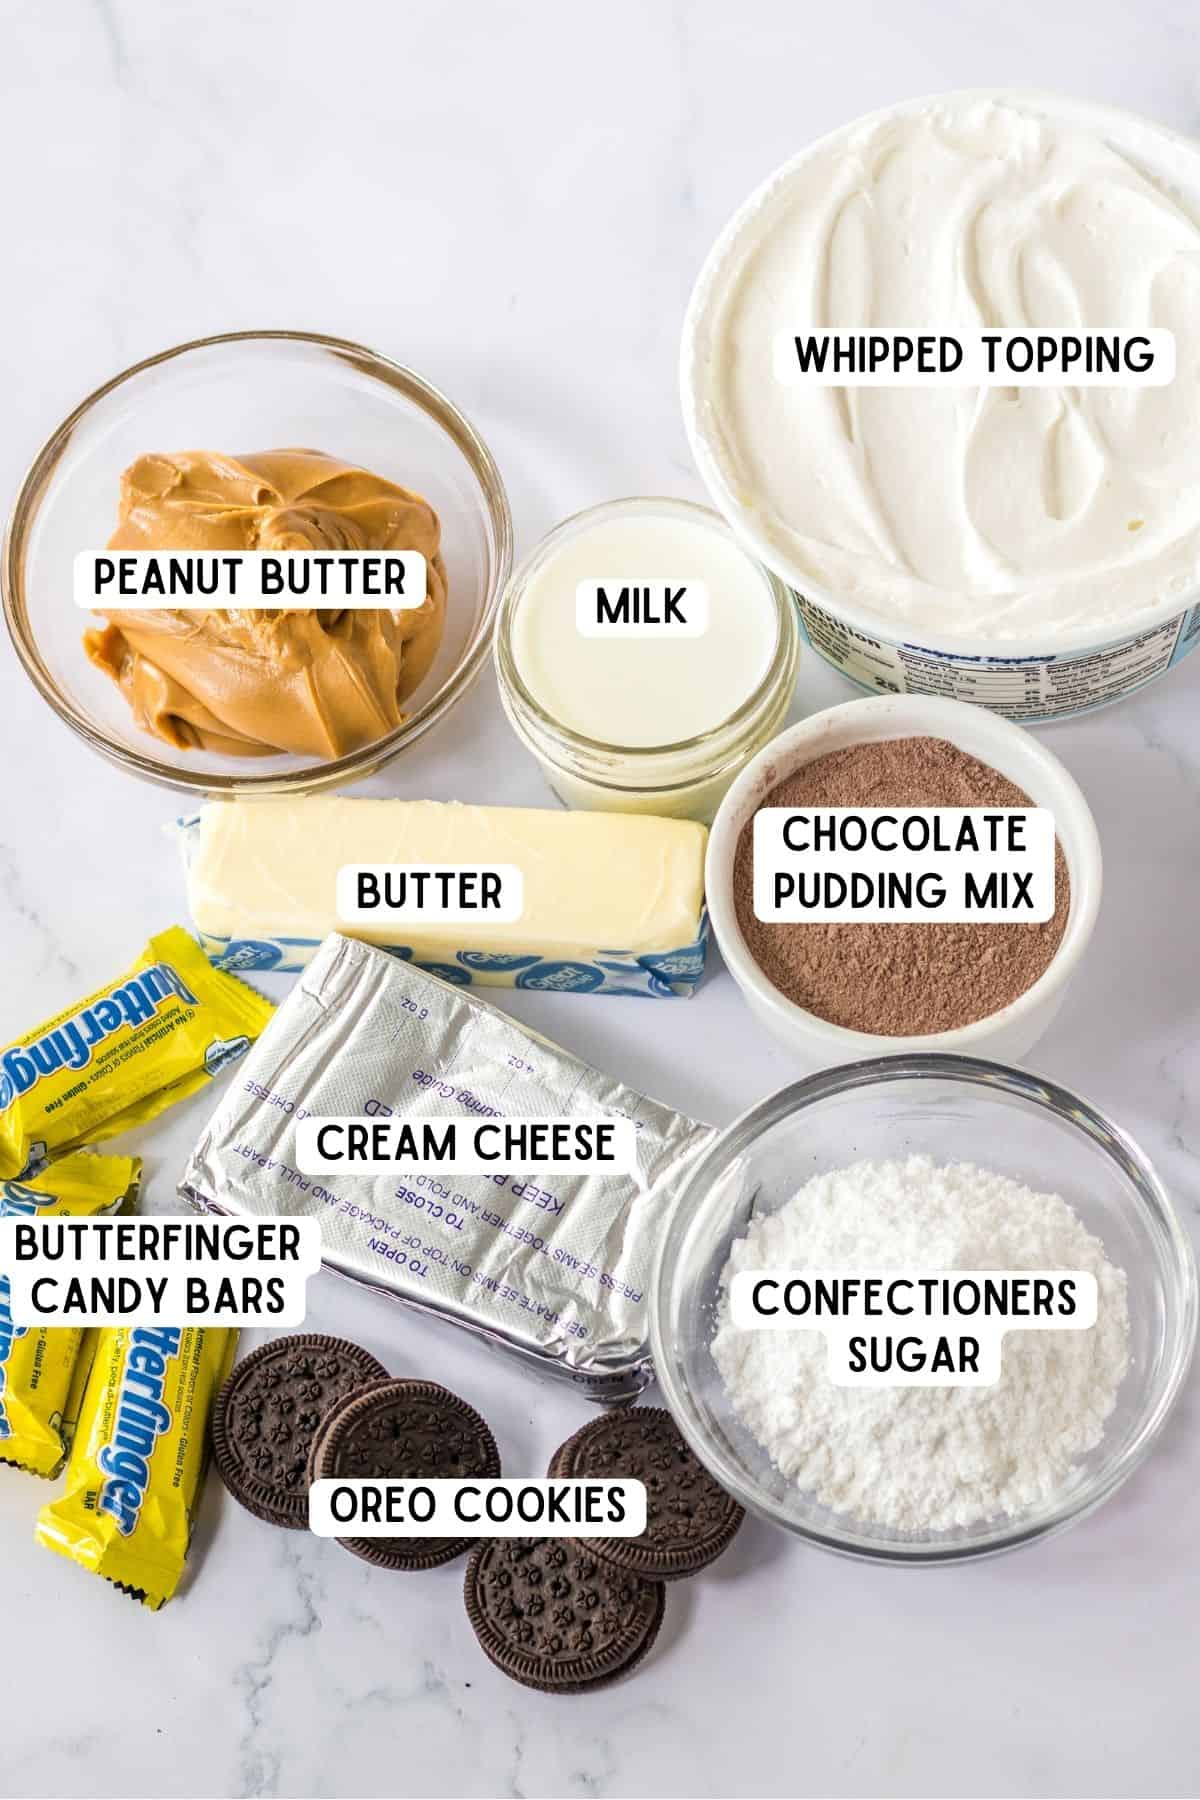 Tub of cool whip, stick of butter, glass of milk, block of cream cheese, mini butterfinger bars, oreo cookies, and bowls of: confectiners sugar, peanut butter, and instant chocolate pudding mix.